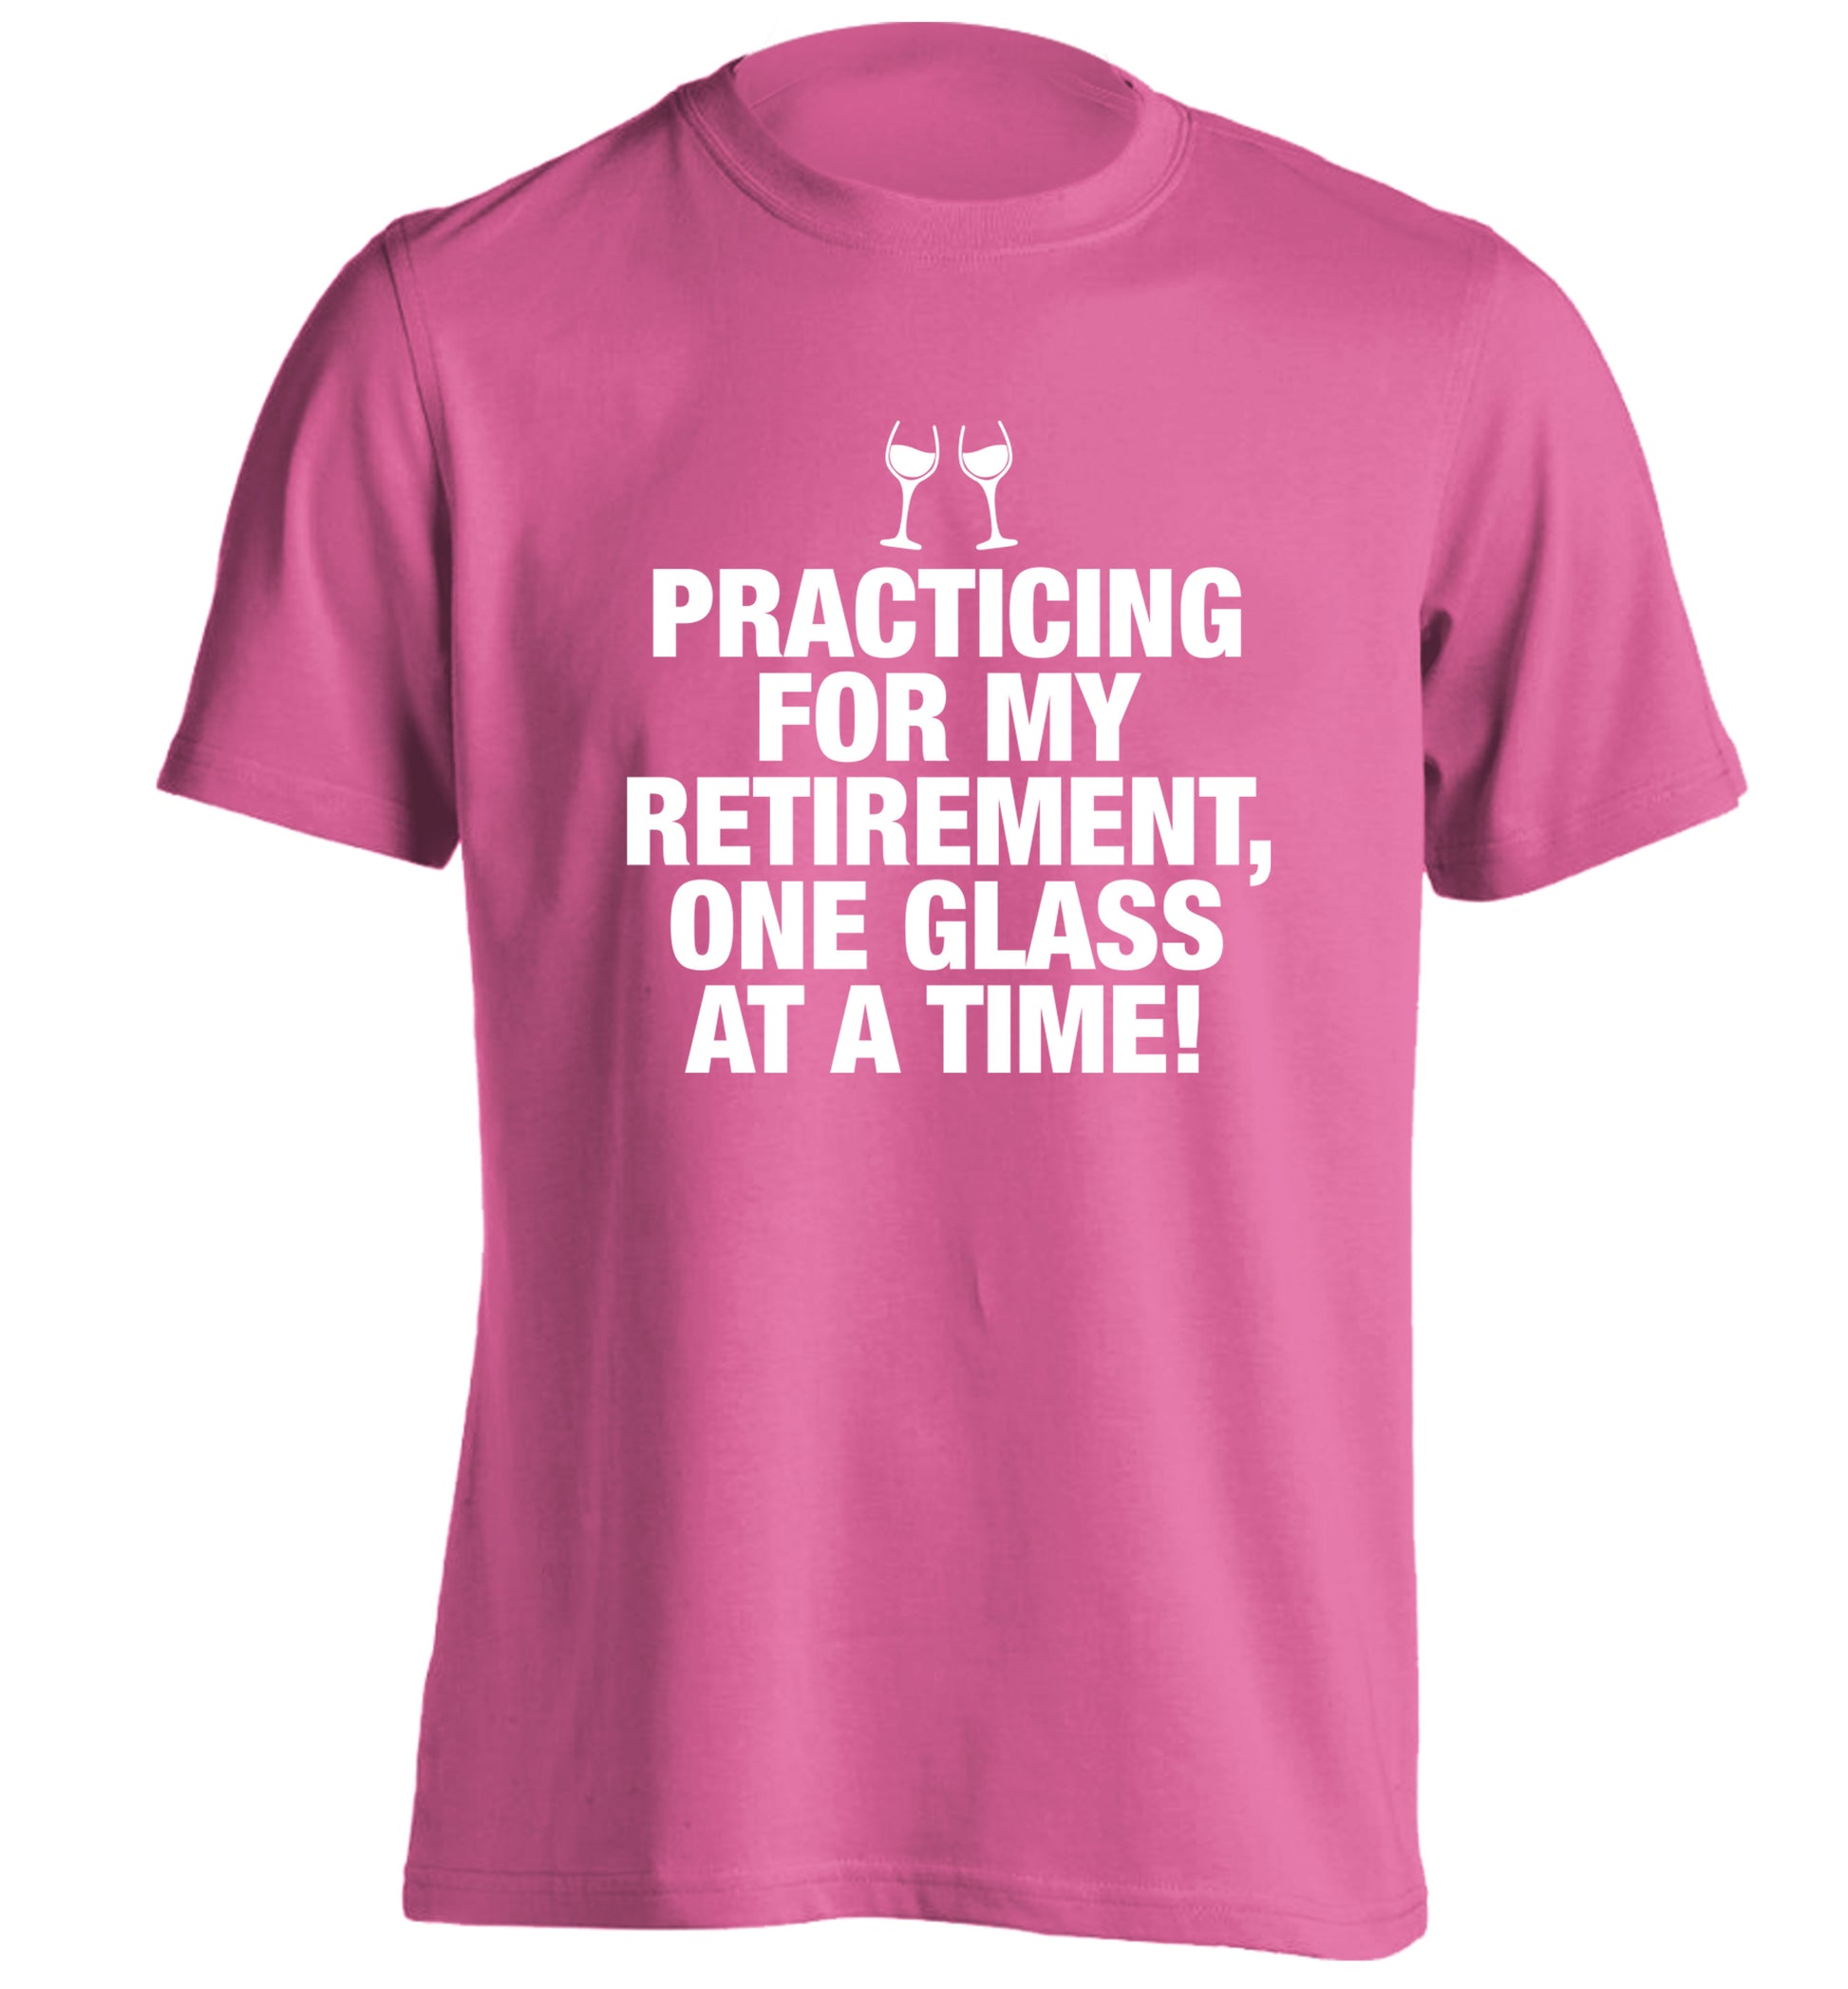 Practicing my retirement one glass at a time adults unisex pink Tshirt 2XL